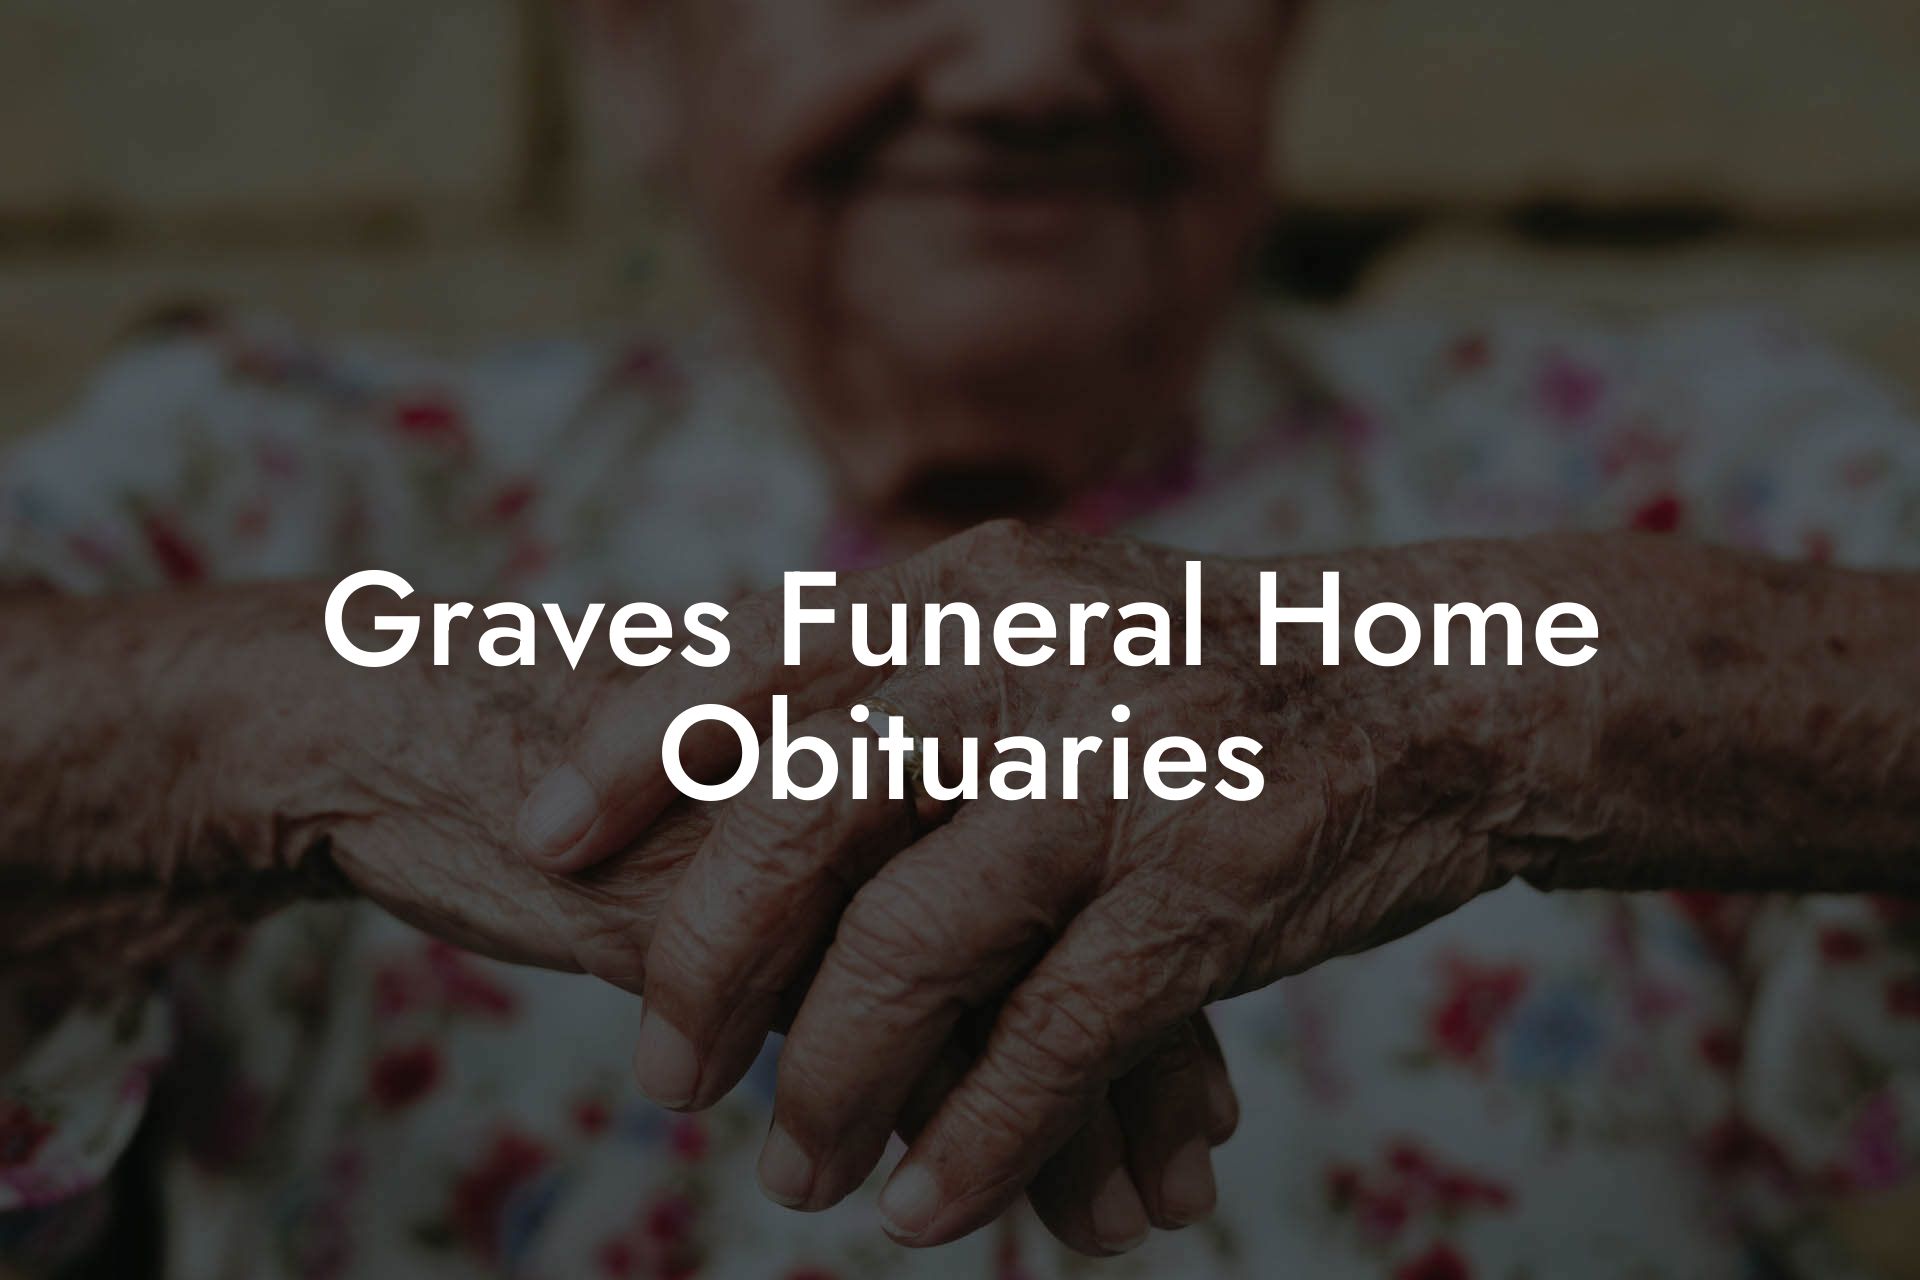 Graves Funeral Home Obituaries